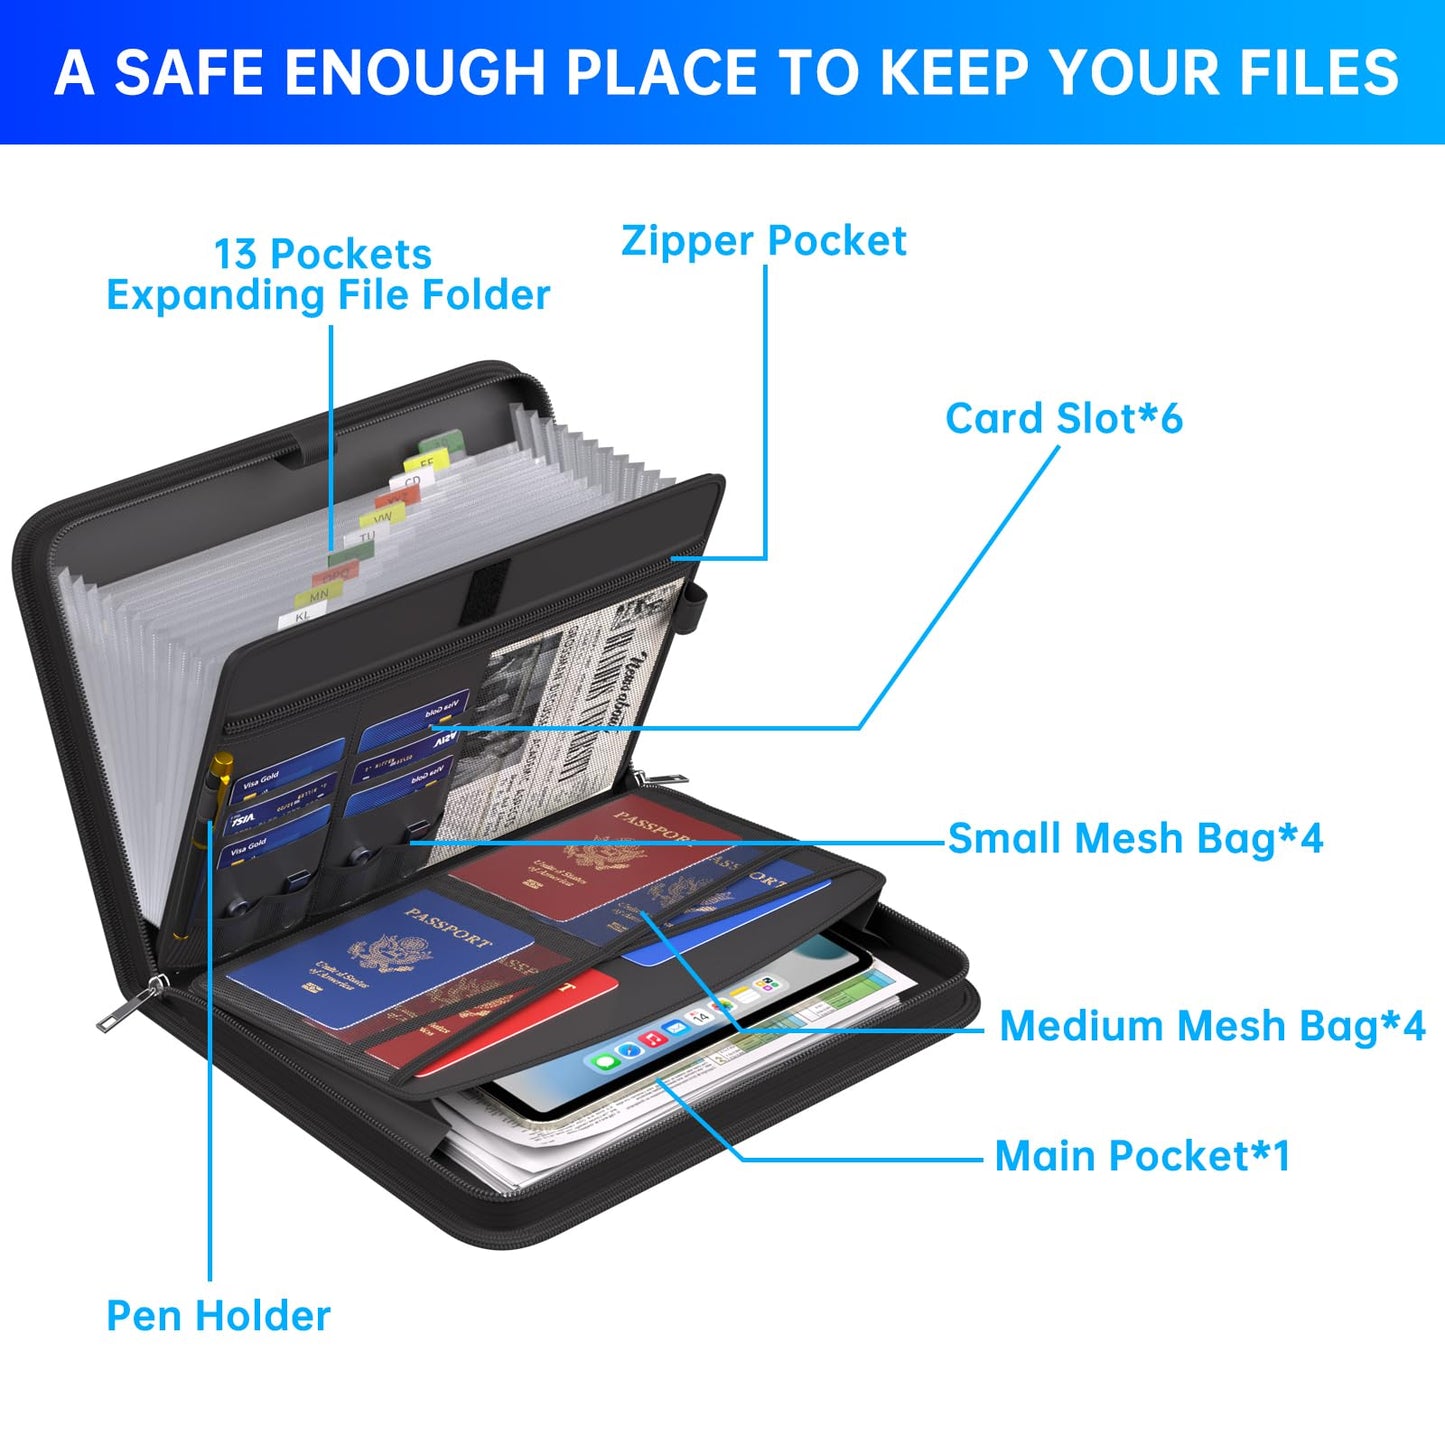 ENGPOW Accordion File Organizer, Fire Resistant Expanding File Folder with Multi Pockets, 13 Pocket File Organizer with Handles and Labels, Portable Home Travel Safe Storage for Letter A4 Files and More